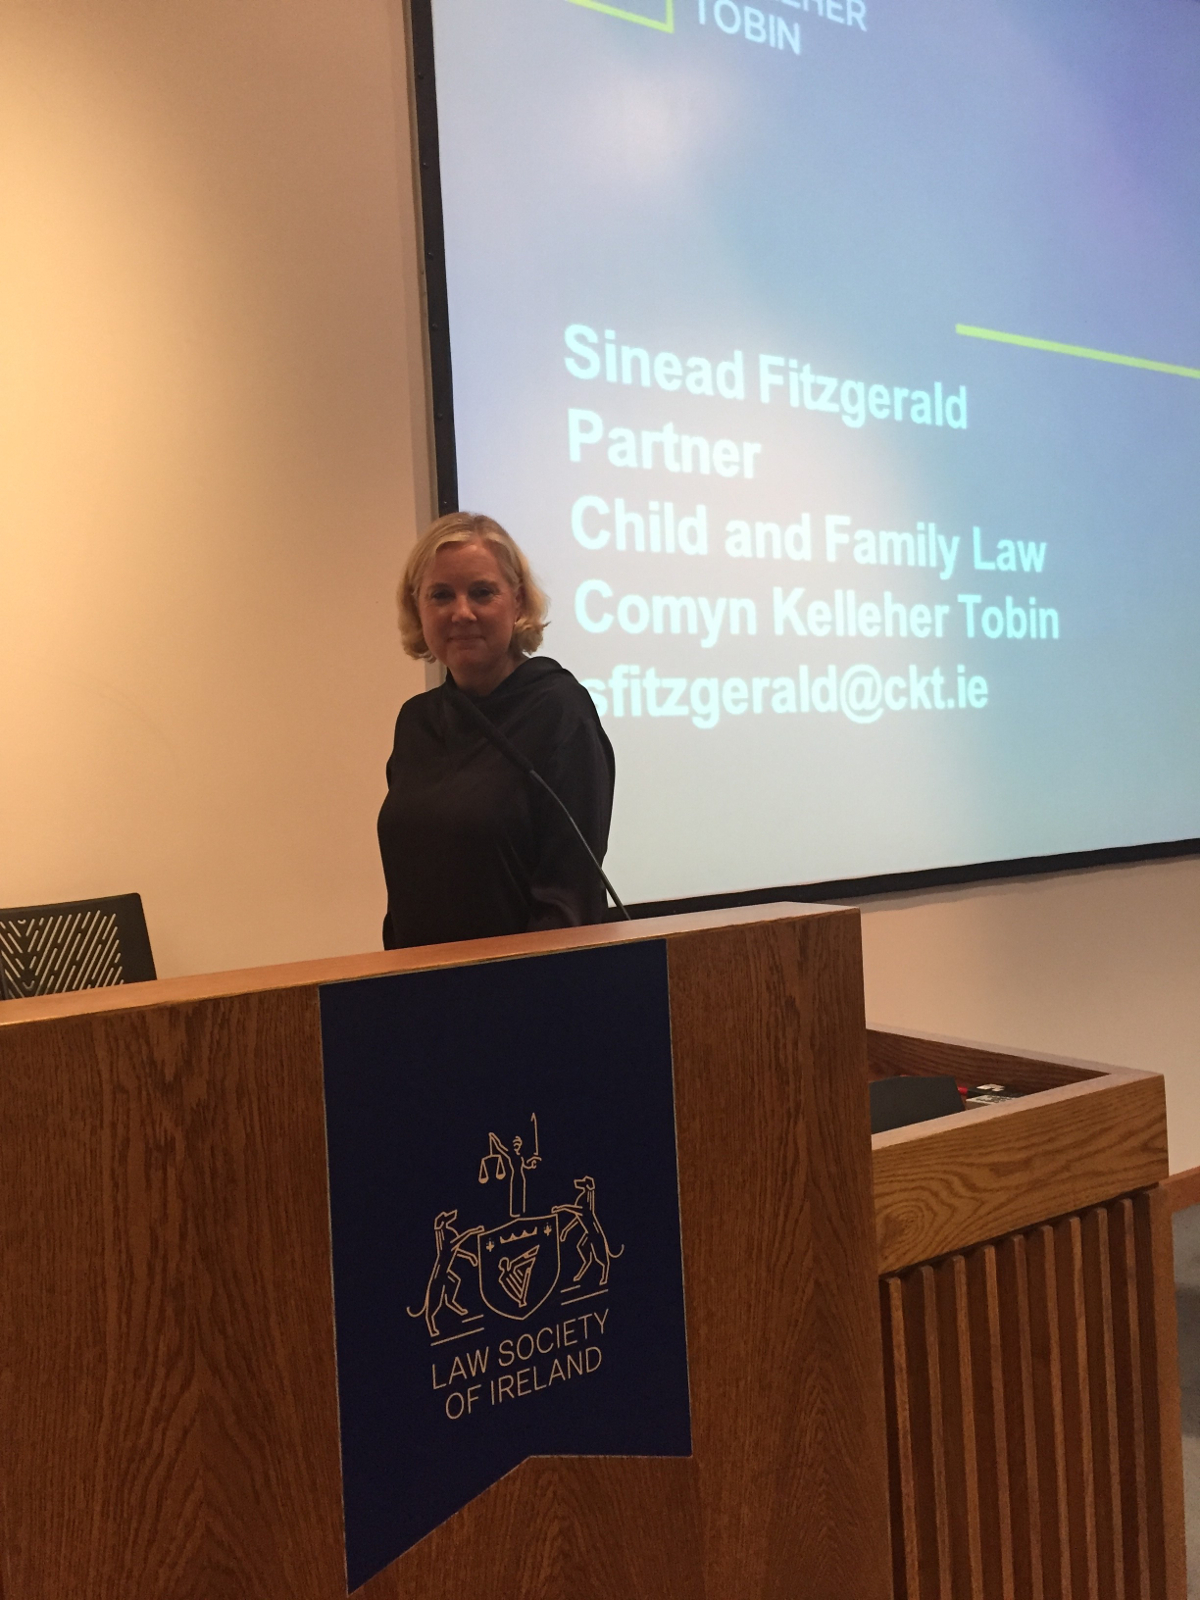 In pictures: Sinead Fitzgerald lectures on financial aspects of family law at Law Society of Ireland